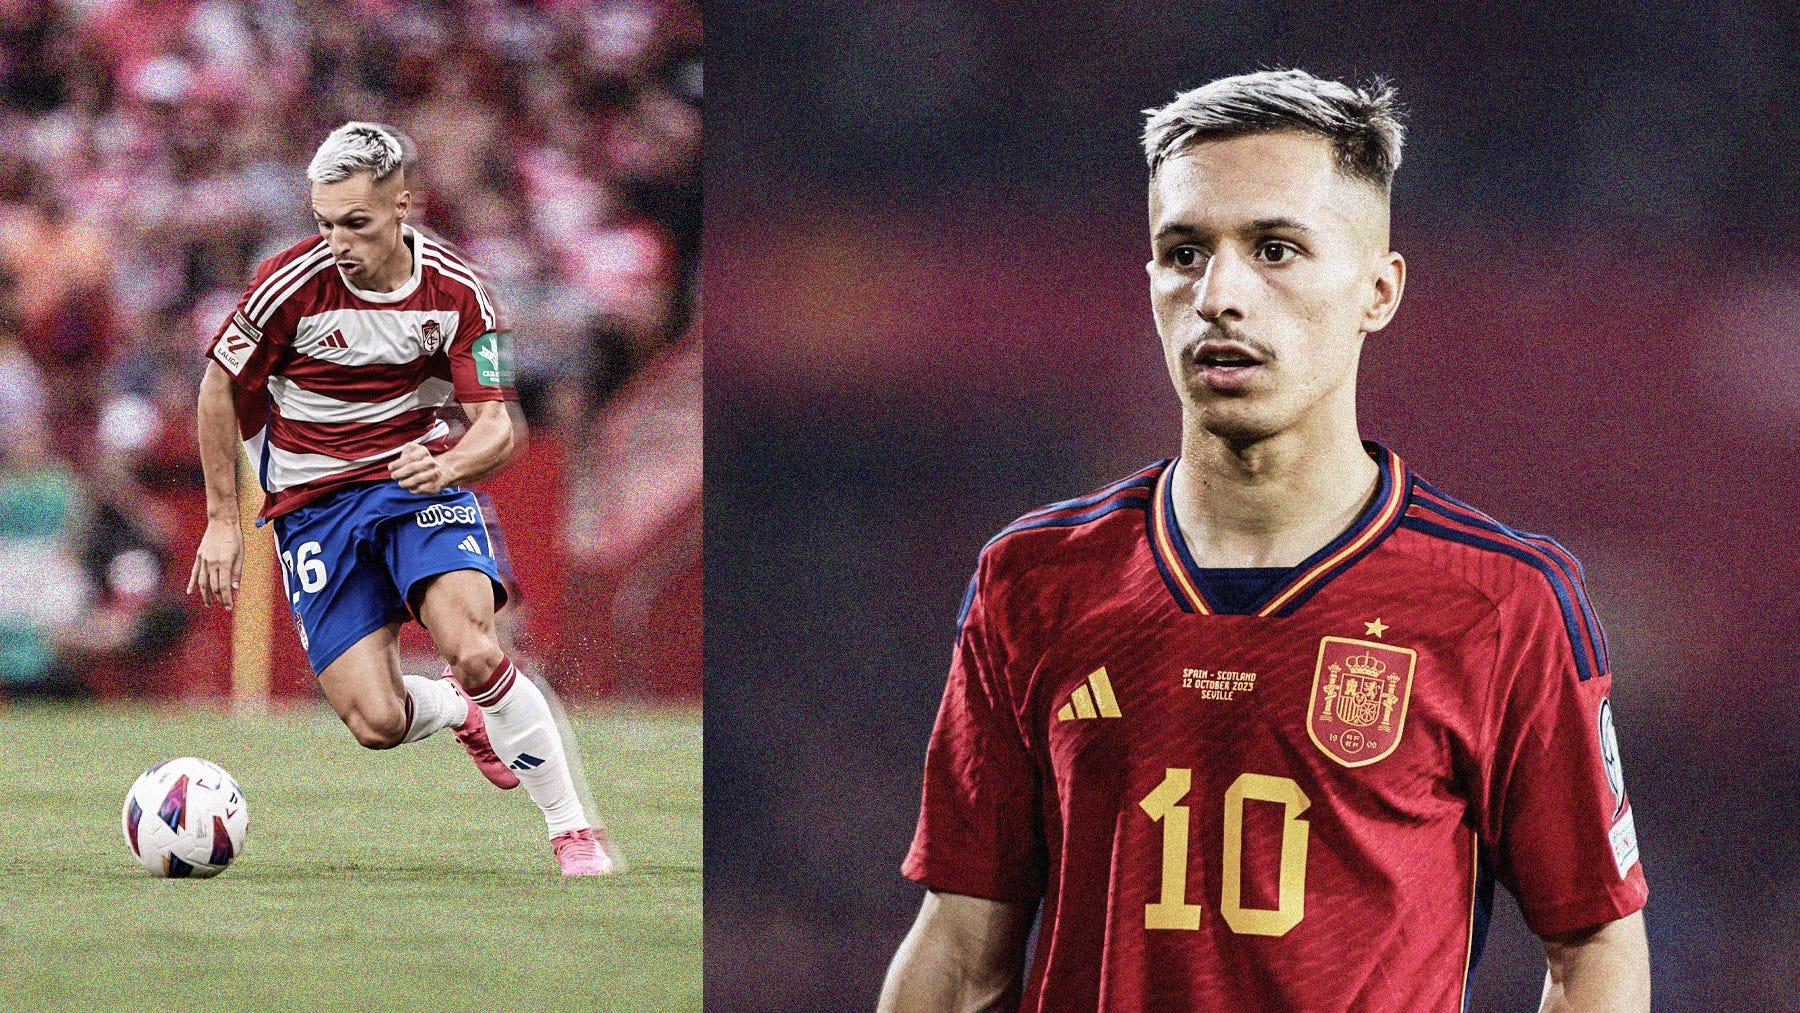 A composite image of Bryan Zaragoza. On the left is him dribbling with the ball for Granada; on the right is a close-up photo of him in a Spain shirt